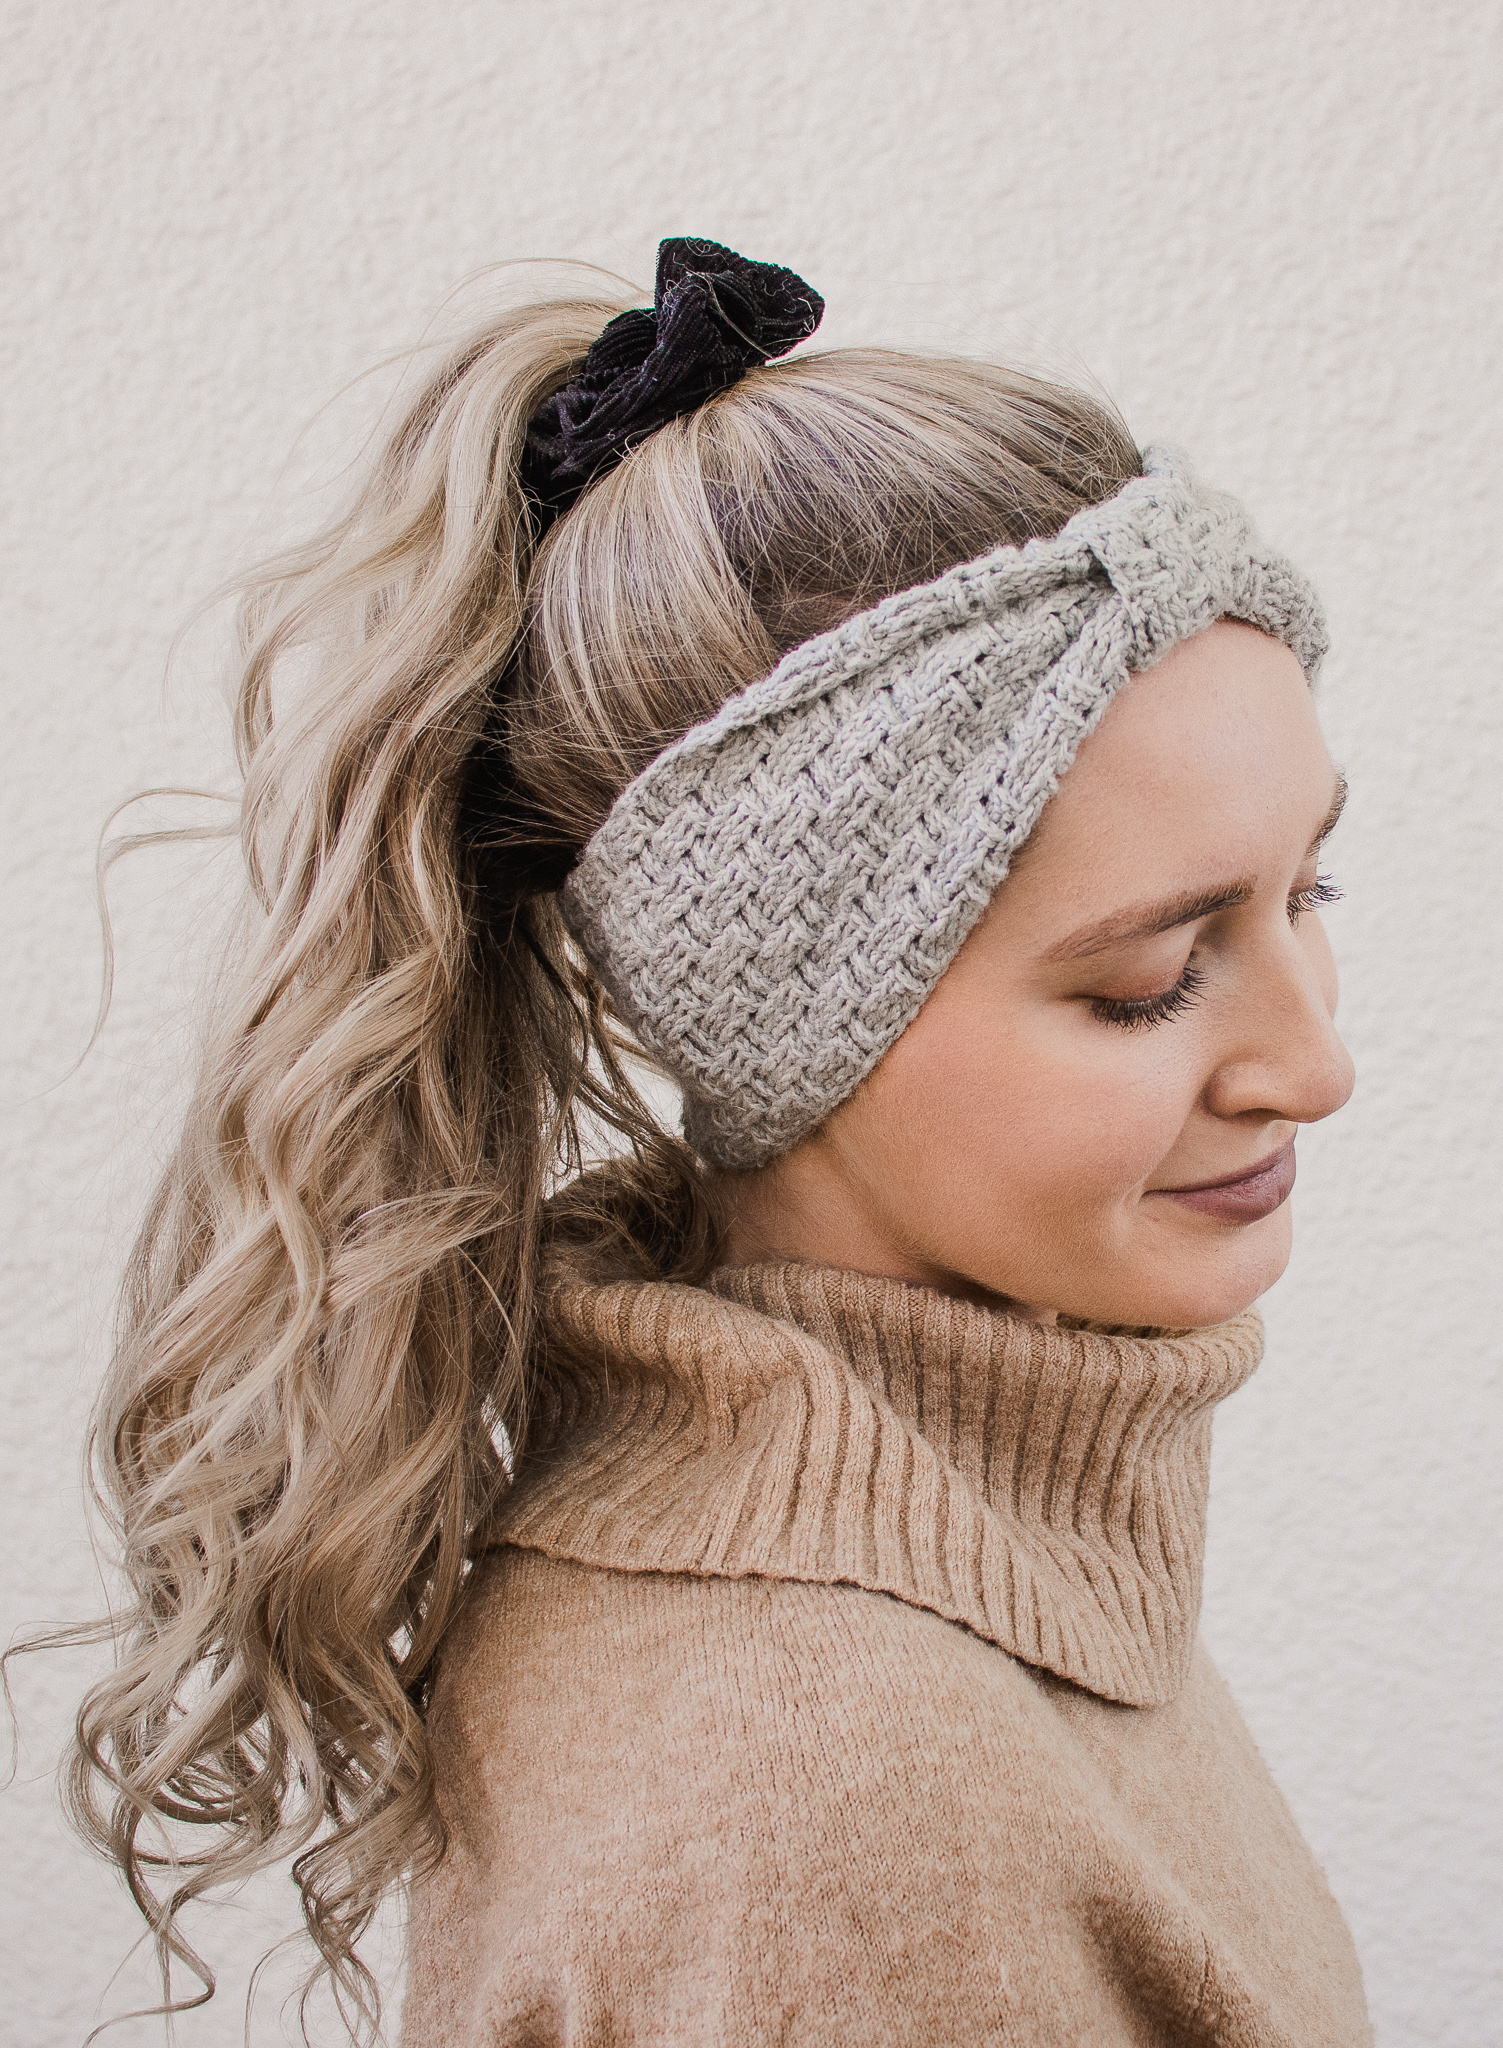 Top 25 Knitting Patterns of Headband and Ear Warmer